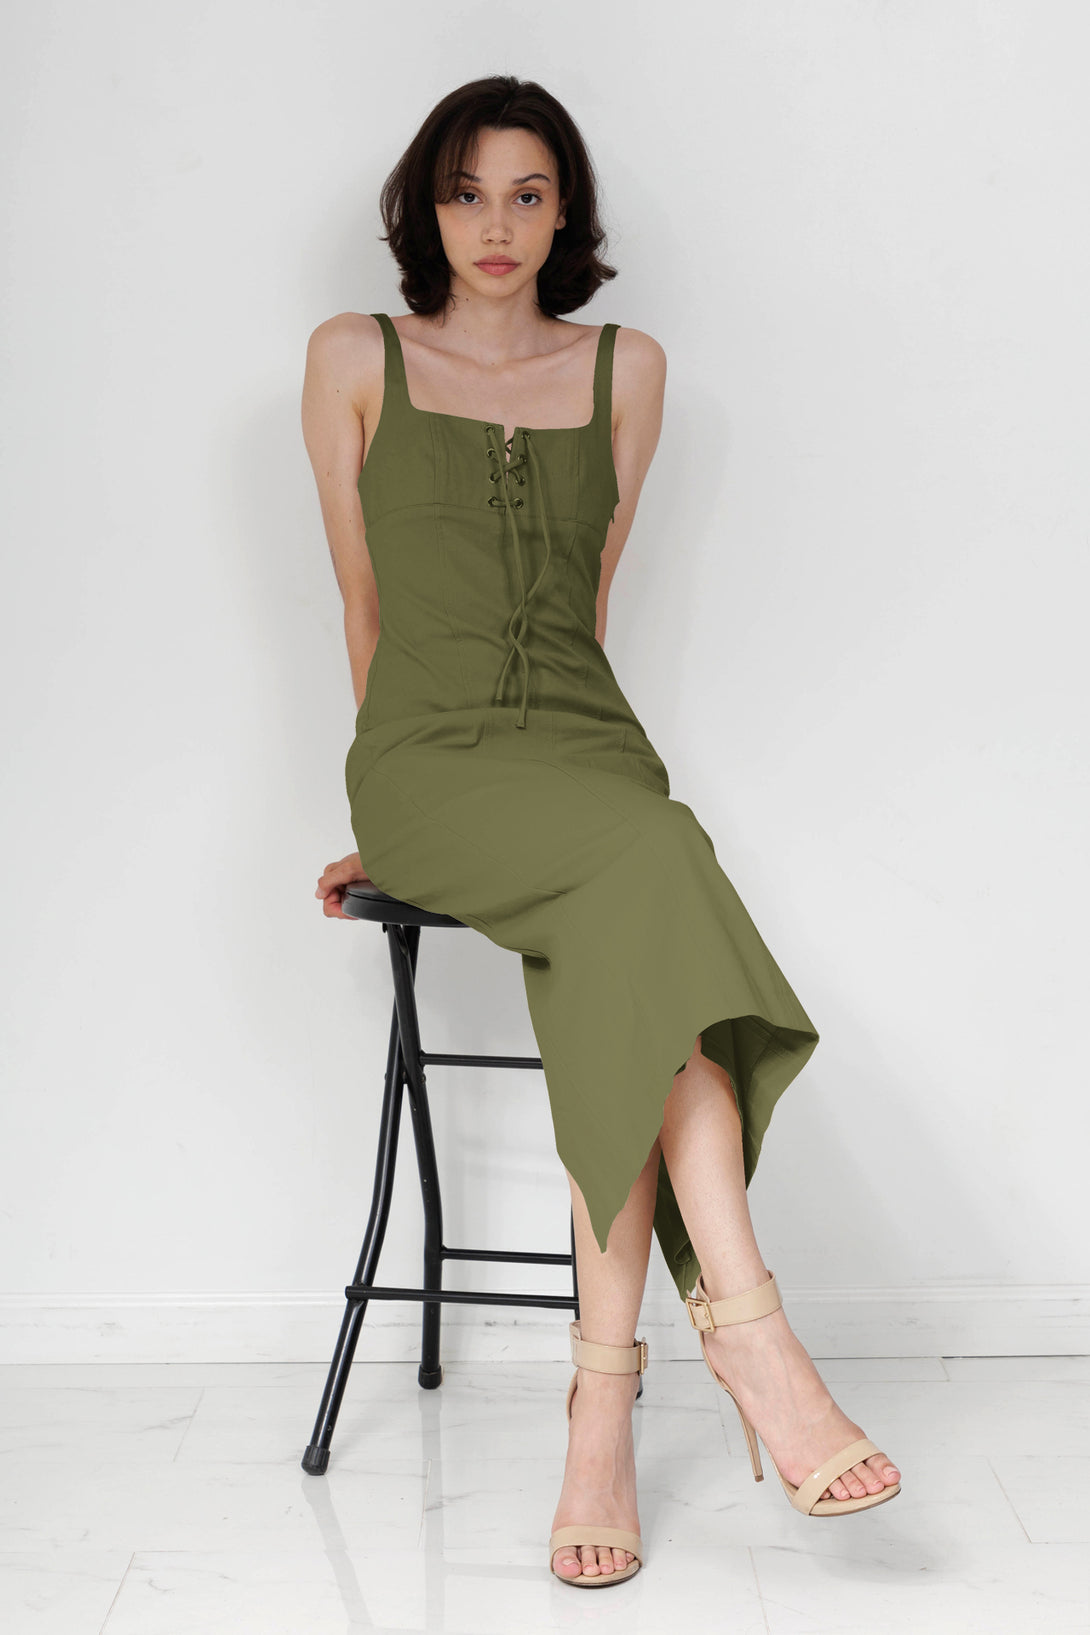 sleeveless midi dress casual, HT 360 Collective, ladies midi summer dresses, lace up lace dress,